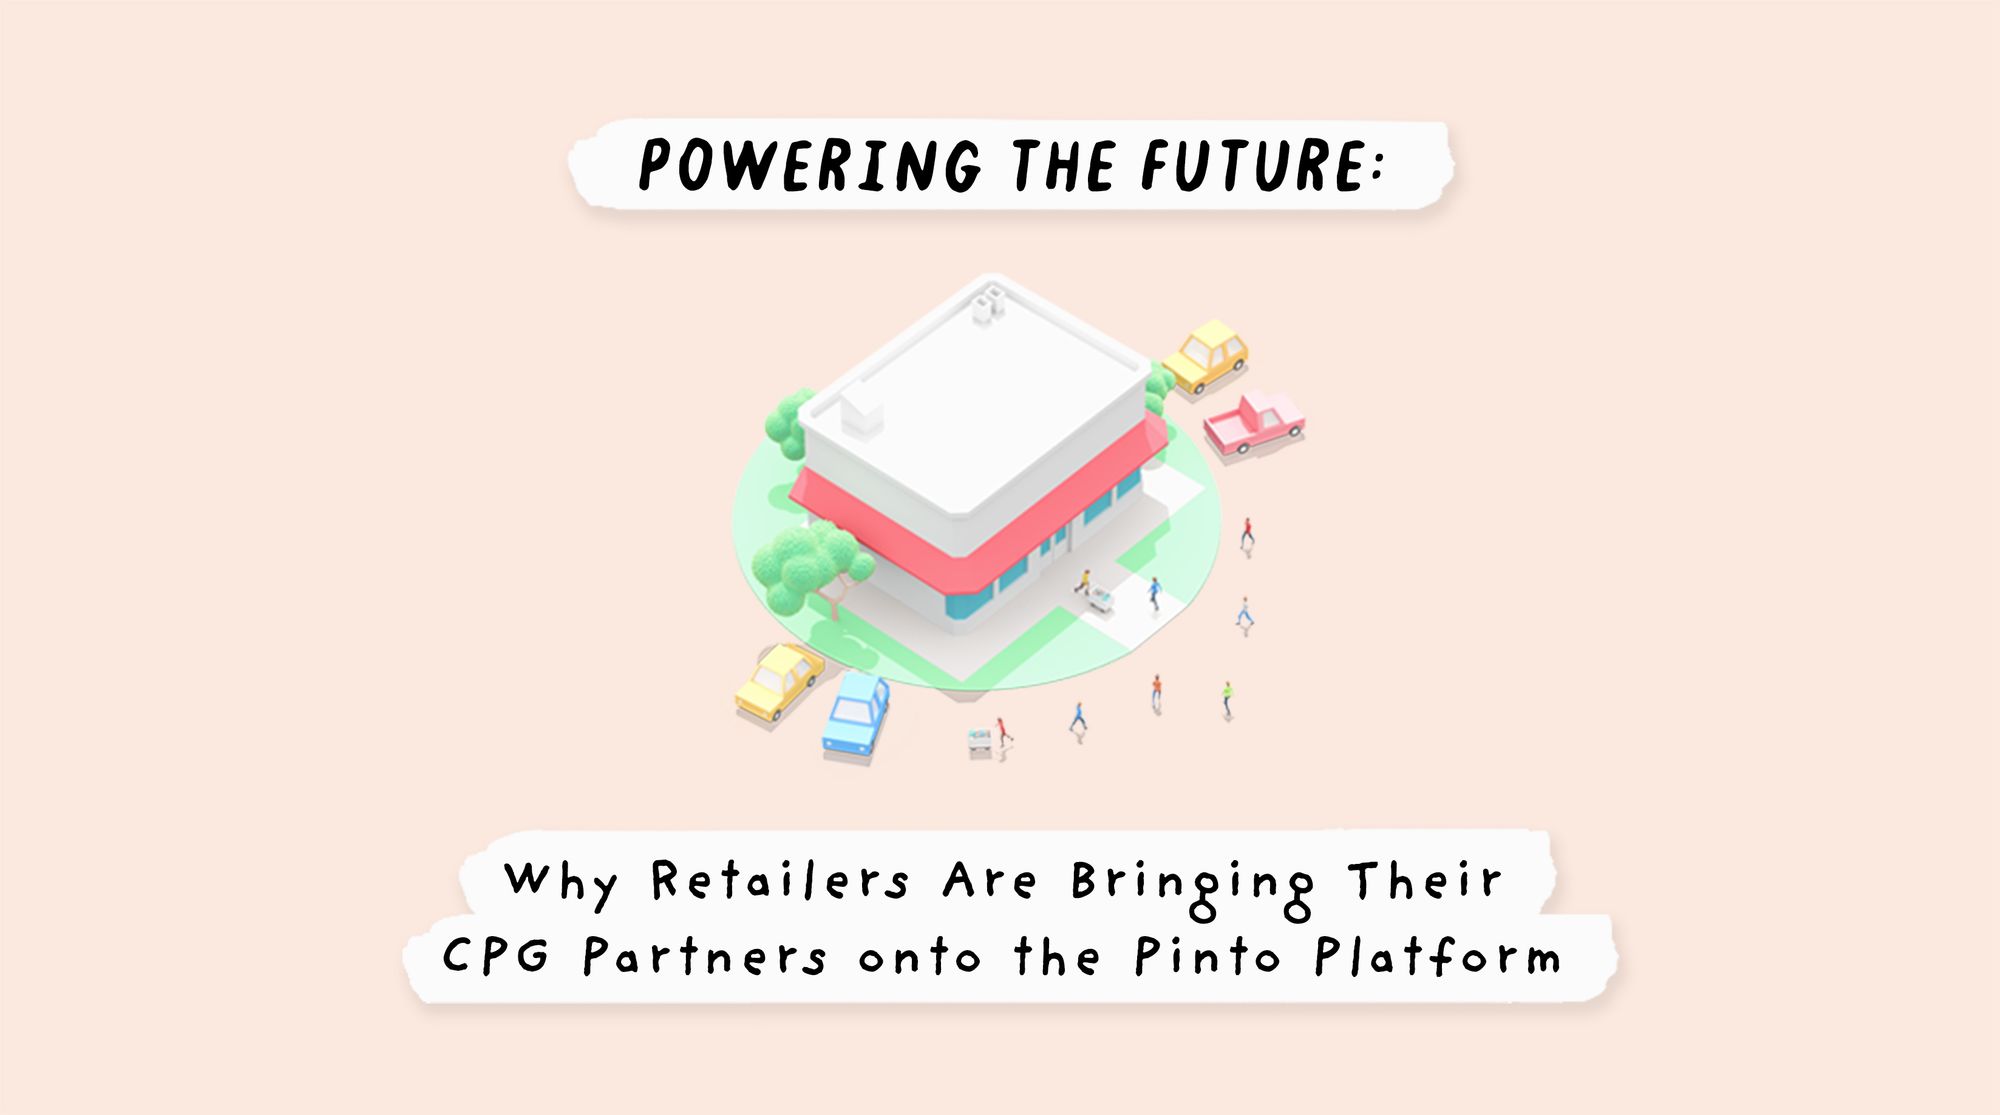 Powering the future: Why retailers are bringing their CPG partners onto the Pinto platform